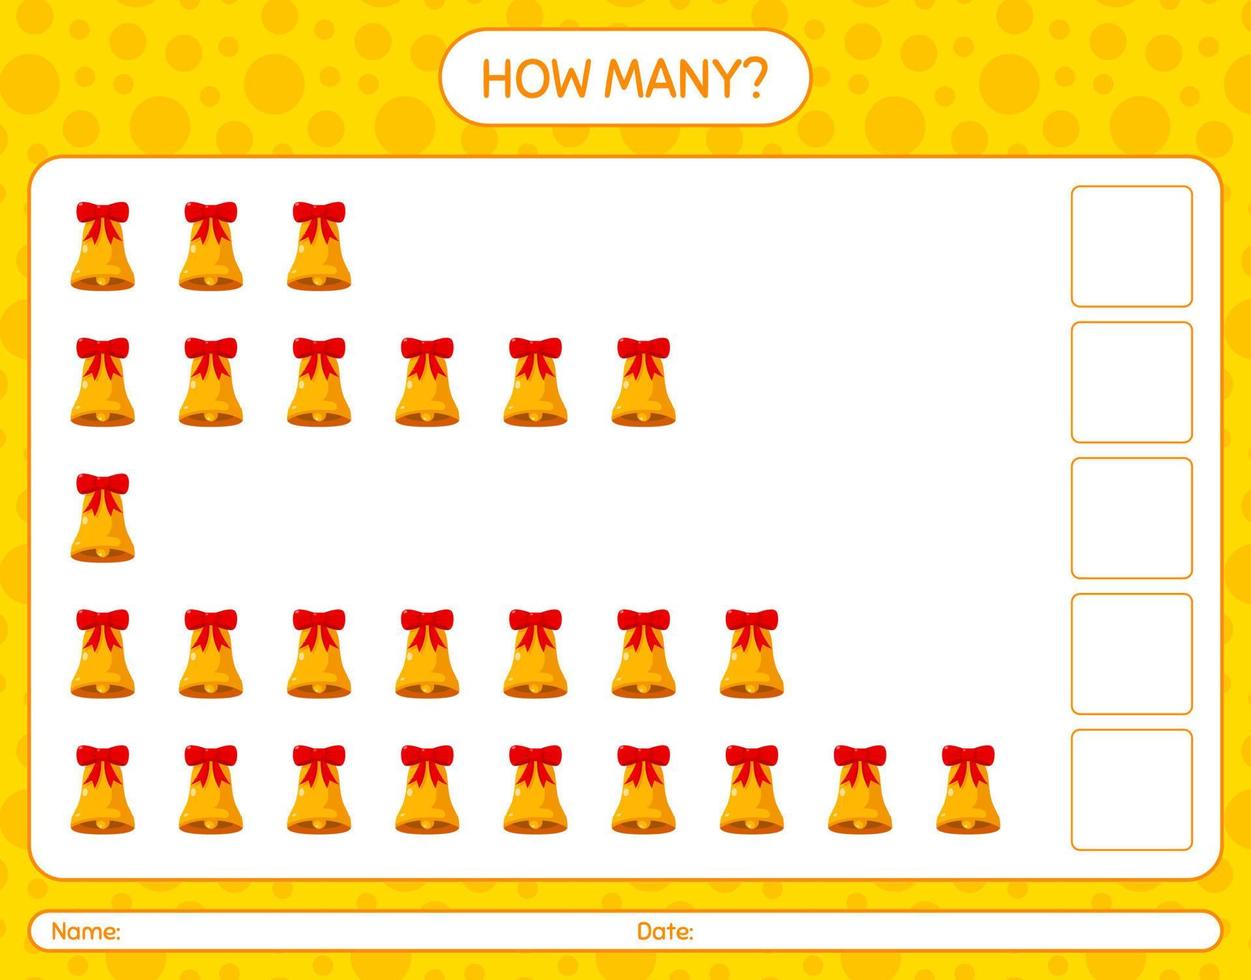 How many counting game with bell. worksheet for preschool kids, kids activity sheet vector